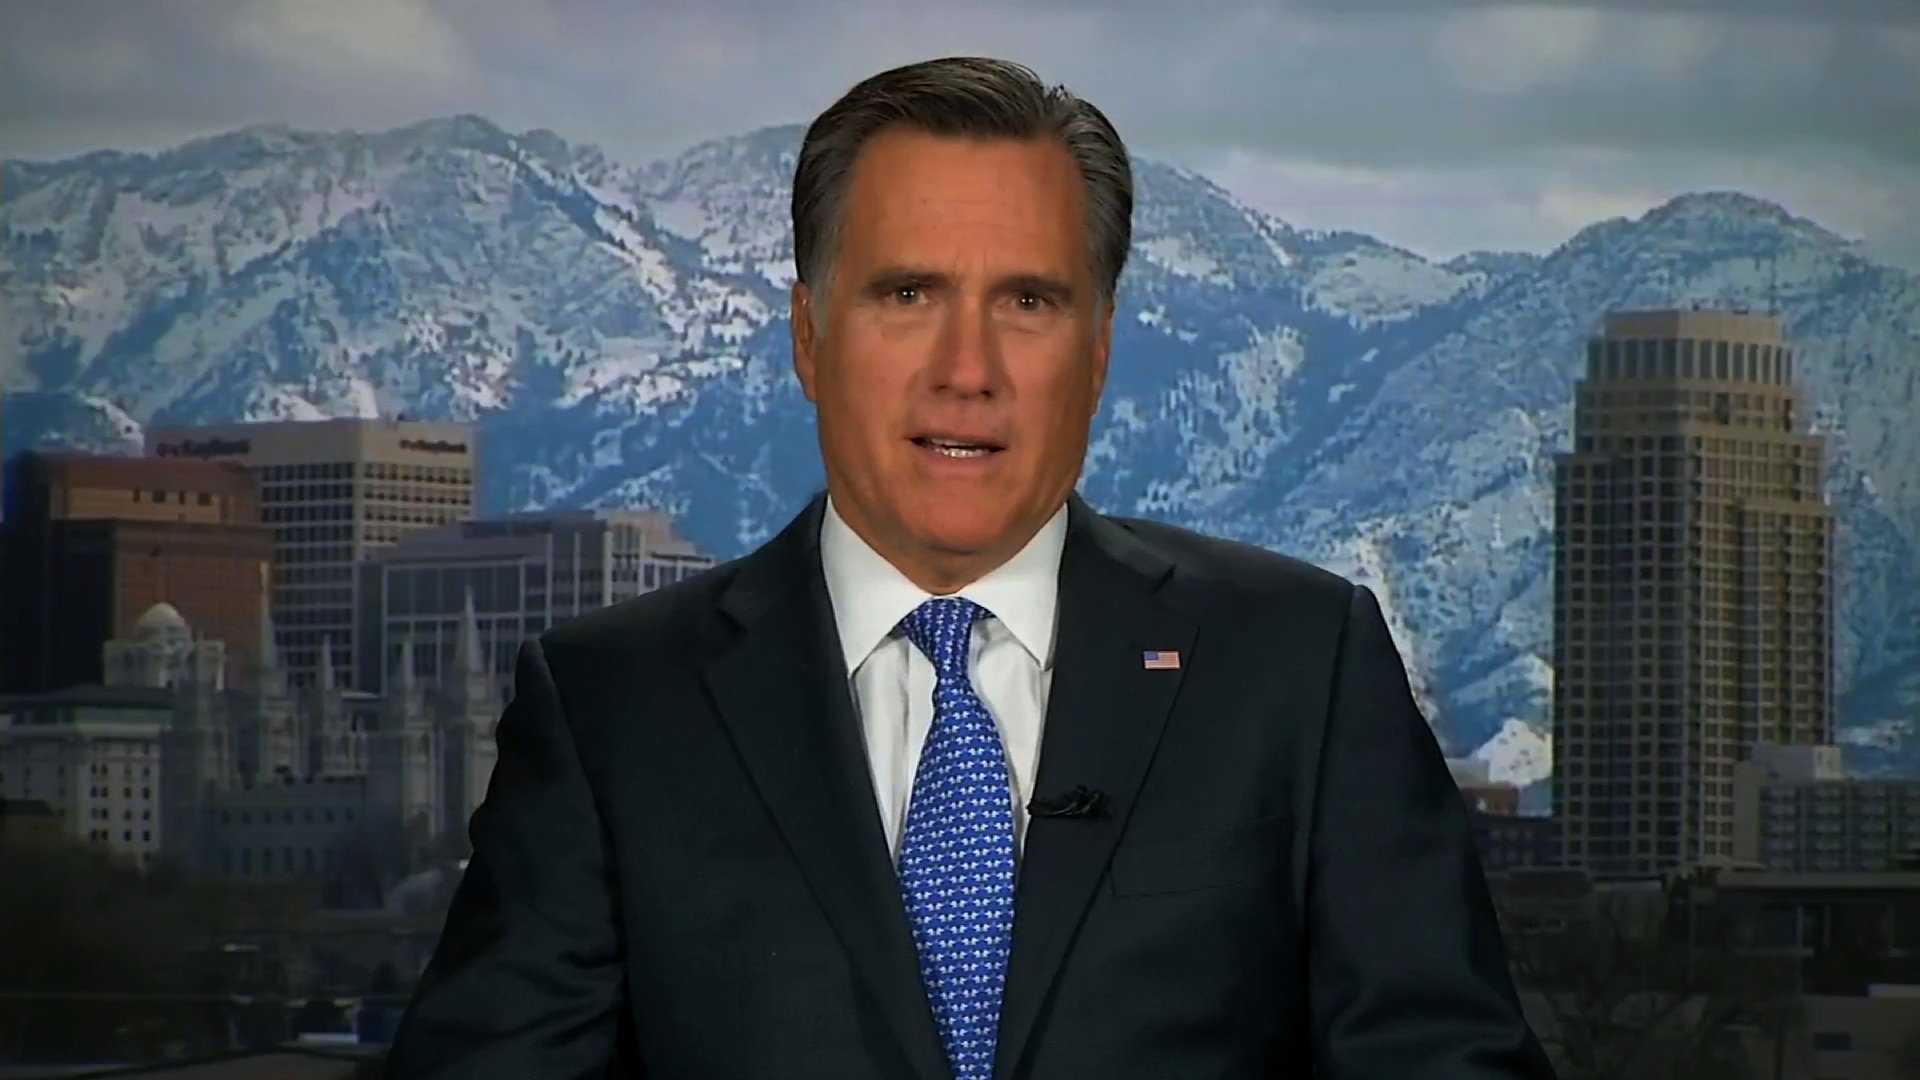 Romney implores Trump to apologize over Charlottesville comments